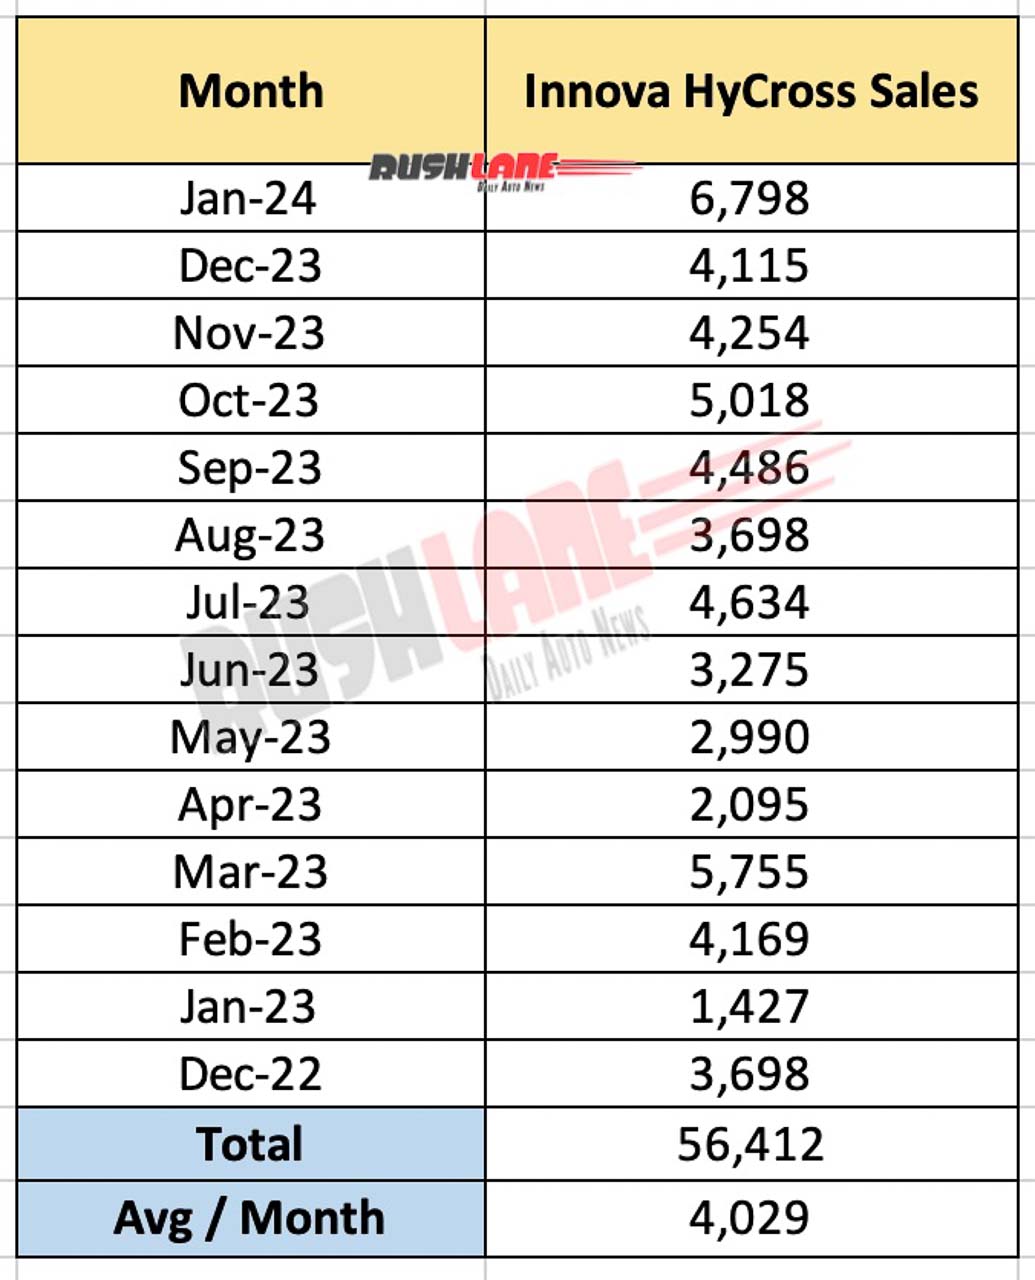 Toyota Innova HyCross monthly sales since launch